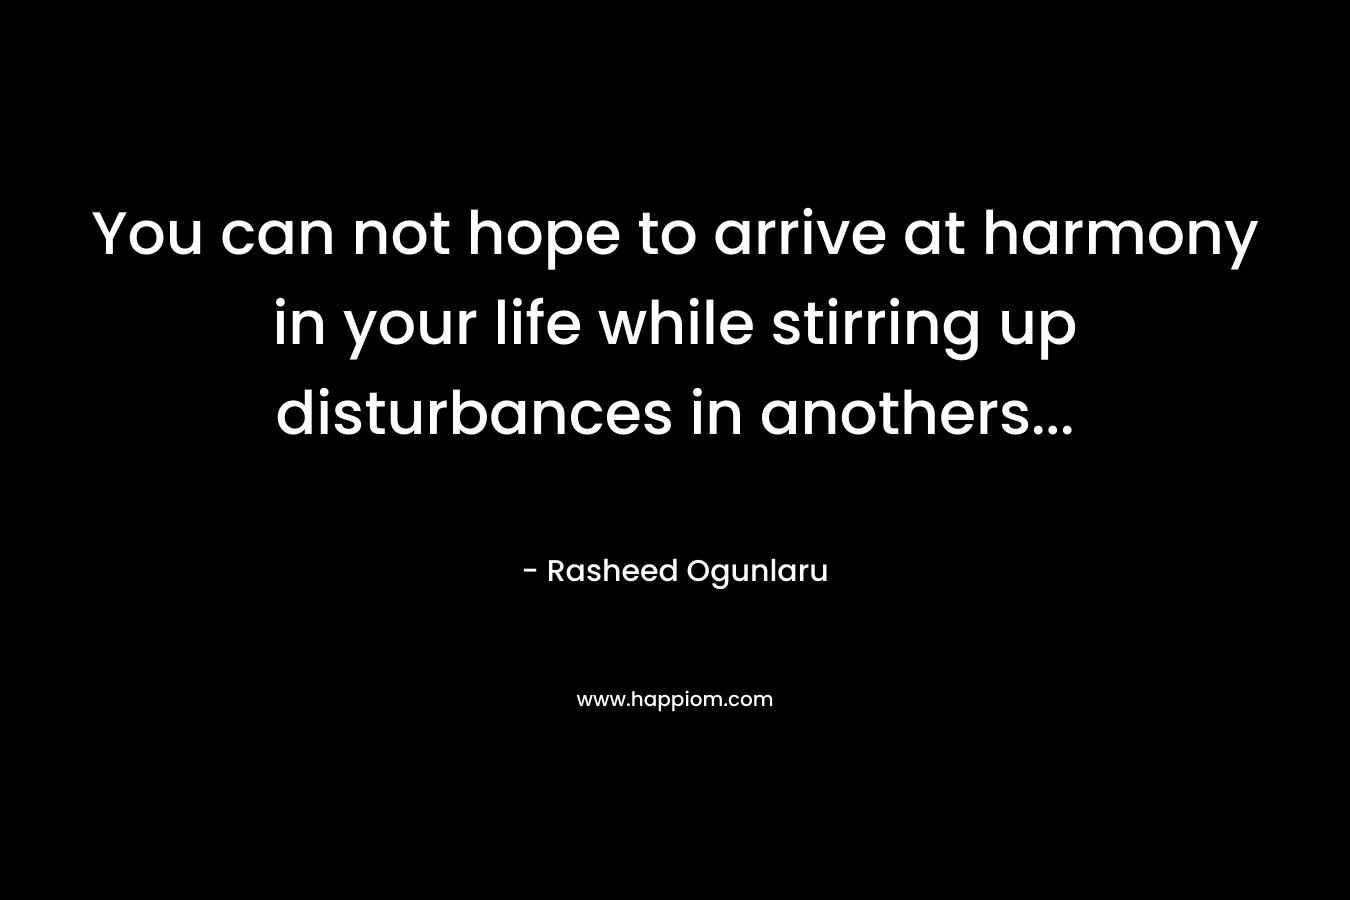 You can not hope to arrive at harmony in your life while stirring up disturbances in anothers...